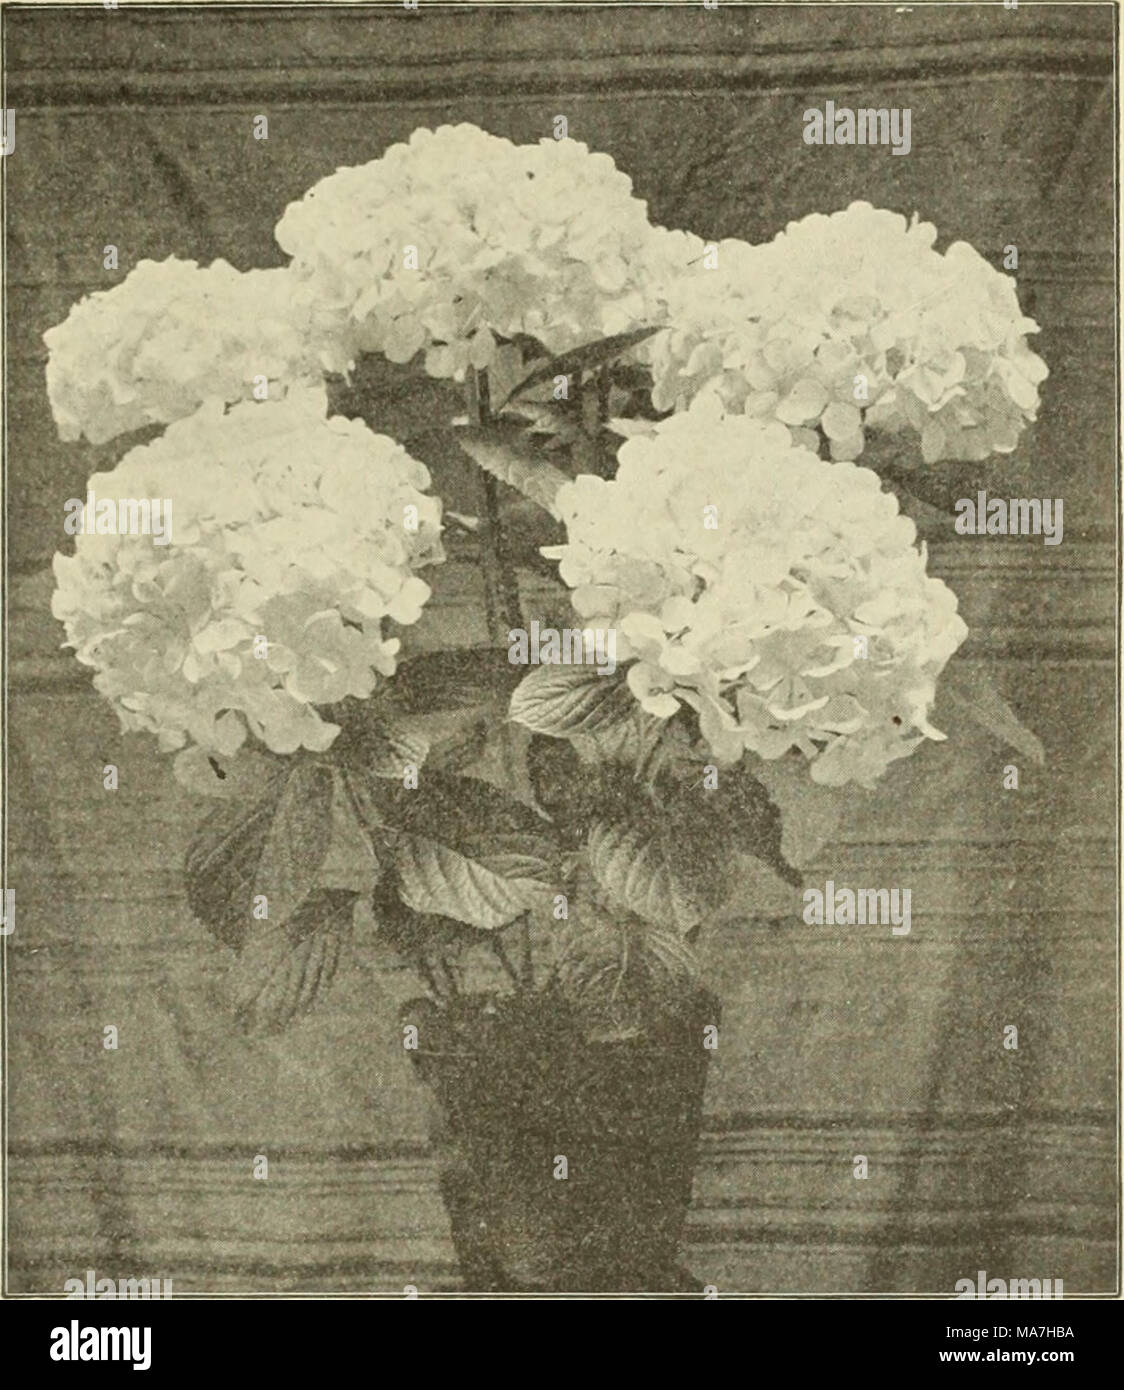 . E. G. Hill &amp; Co., wholesale florists . Hydrangea — &quot; Thos. Hogg.&quot; LANTANAS. Four Novelties, per Dozen $2.00. A. Claveaii. Very dwarf, and of bushj% spreading habit, covered with flowers of silvery rose with center of soft yellow ; a beautiful contra.st. AniieL Semi-dwarf; very compact; very free in blooming; ombel and floret of fine size ; color reddish orange with yellow center. F. Givaiideaii. Dwarf and branching, very free in bloom, center, i)ink and orange, bordered bright rose. Extra good. La Pactole. Very dwarf, a mass of golden yellow bloom, splendid for borders. Older S Stock Photo